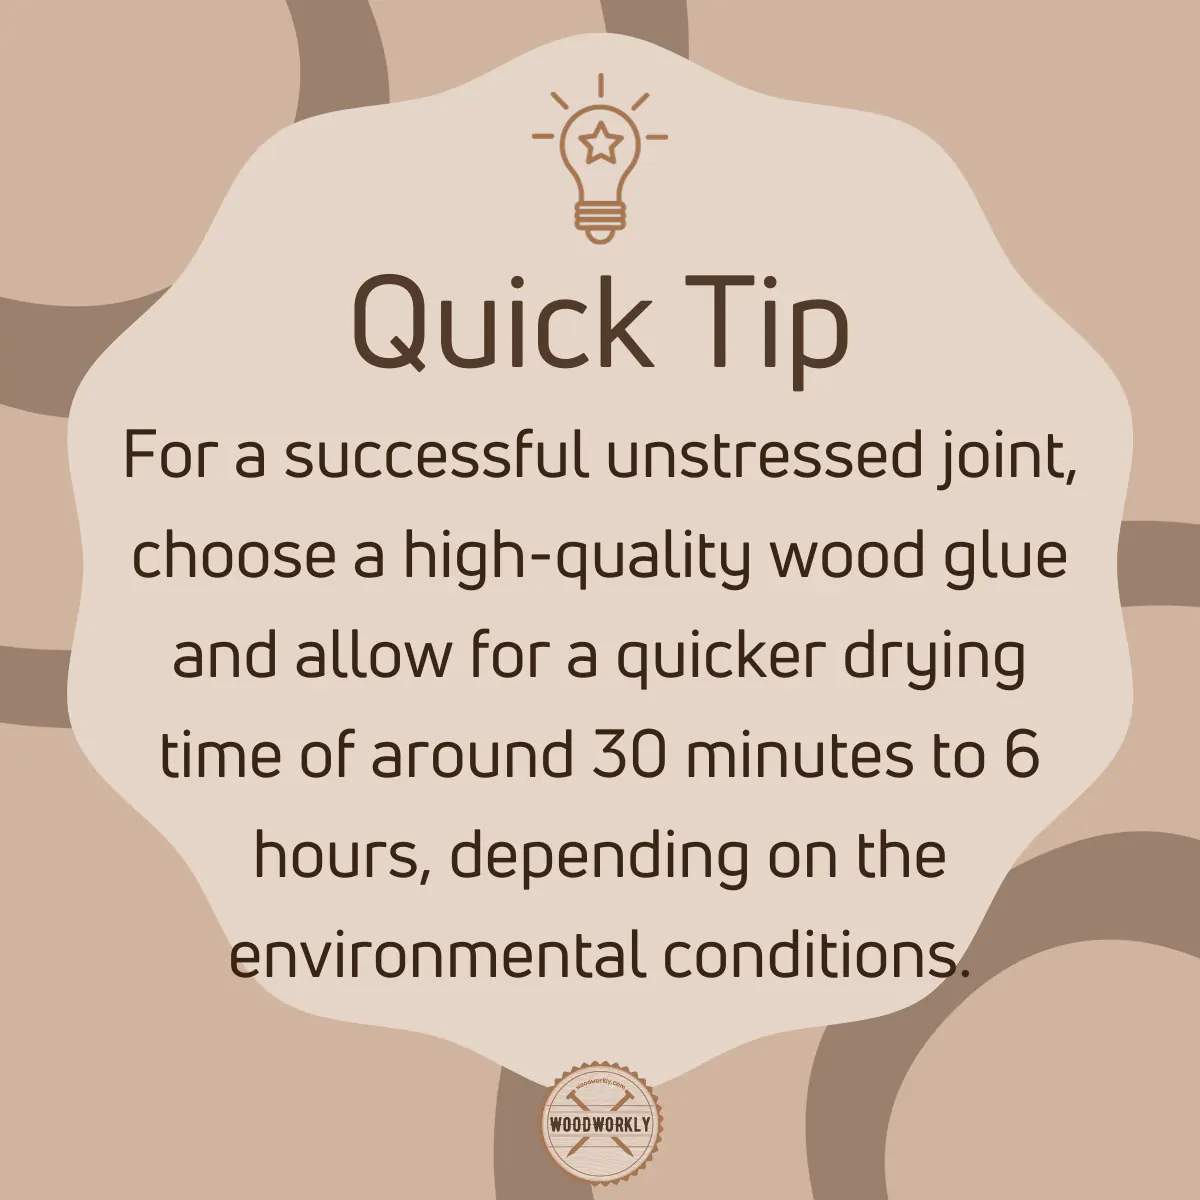 Tip for making an unstressed joint